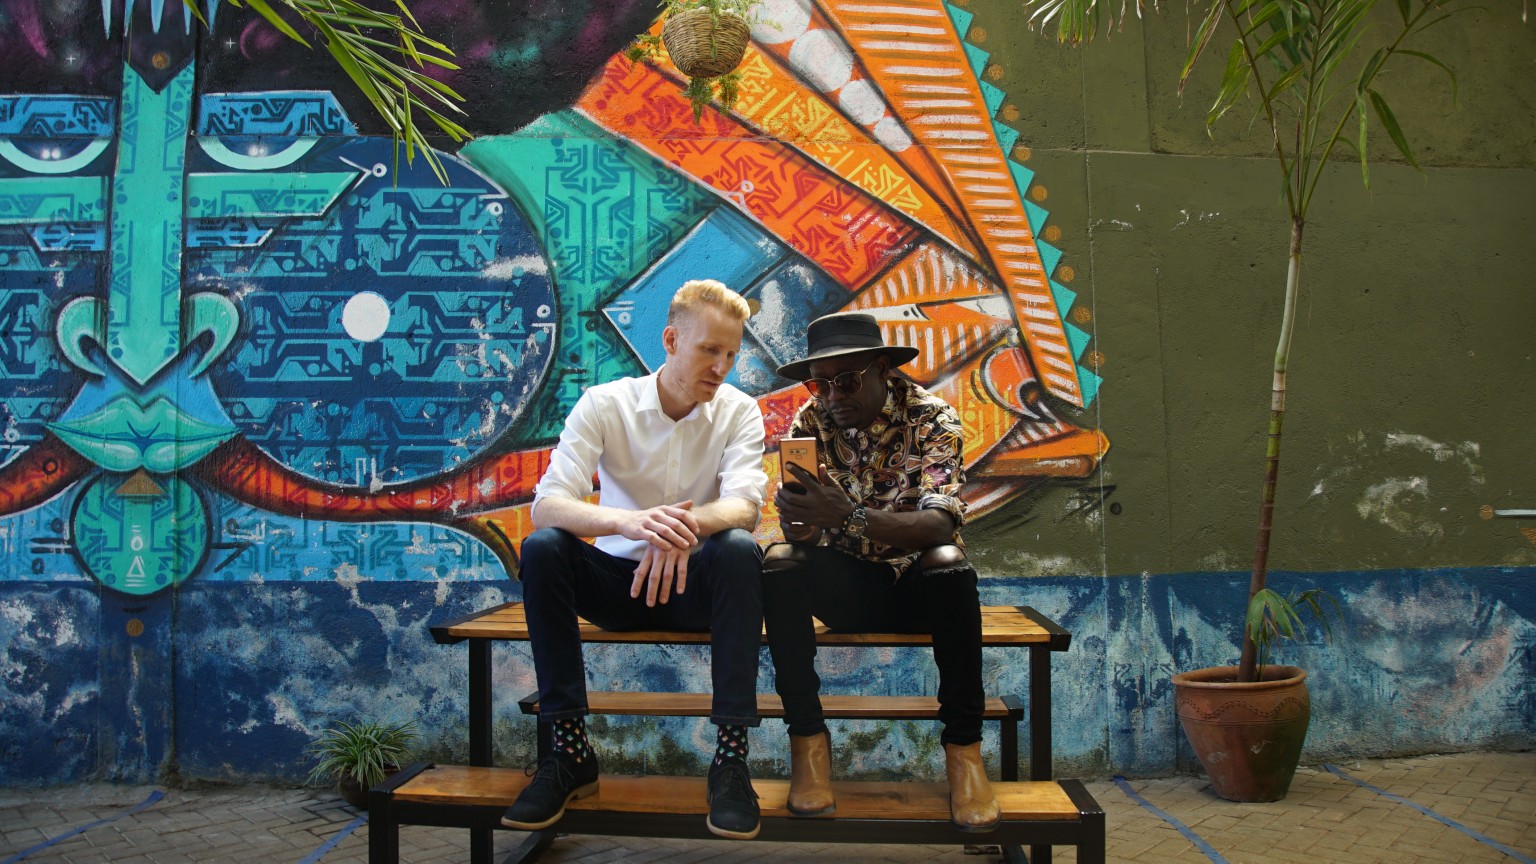 Mdundo co-founders Martin Moeller Nielsen (CEO) and Francis Amisi (Frasha), who is also an artist.